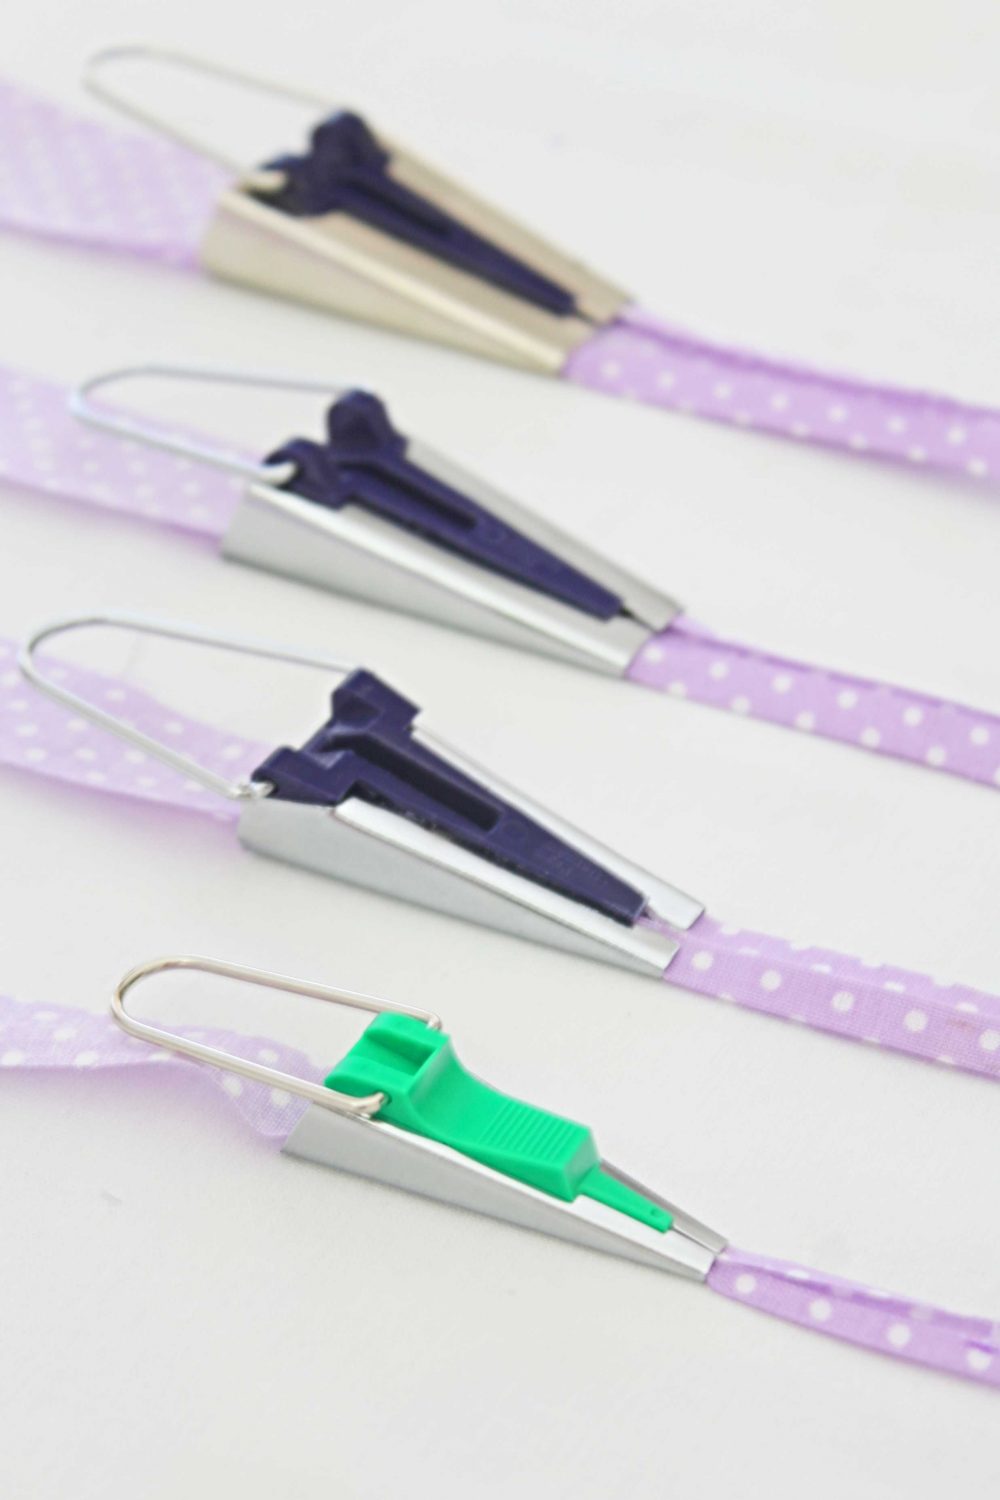 how to make bias tape with a bias tape maker